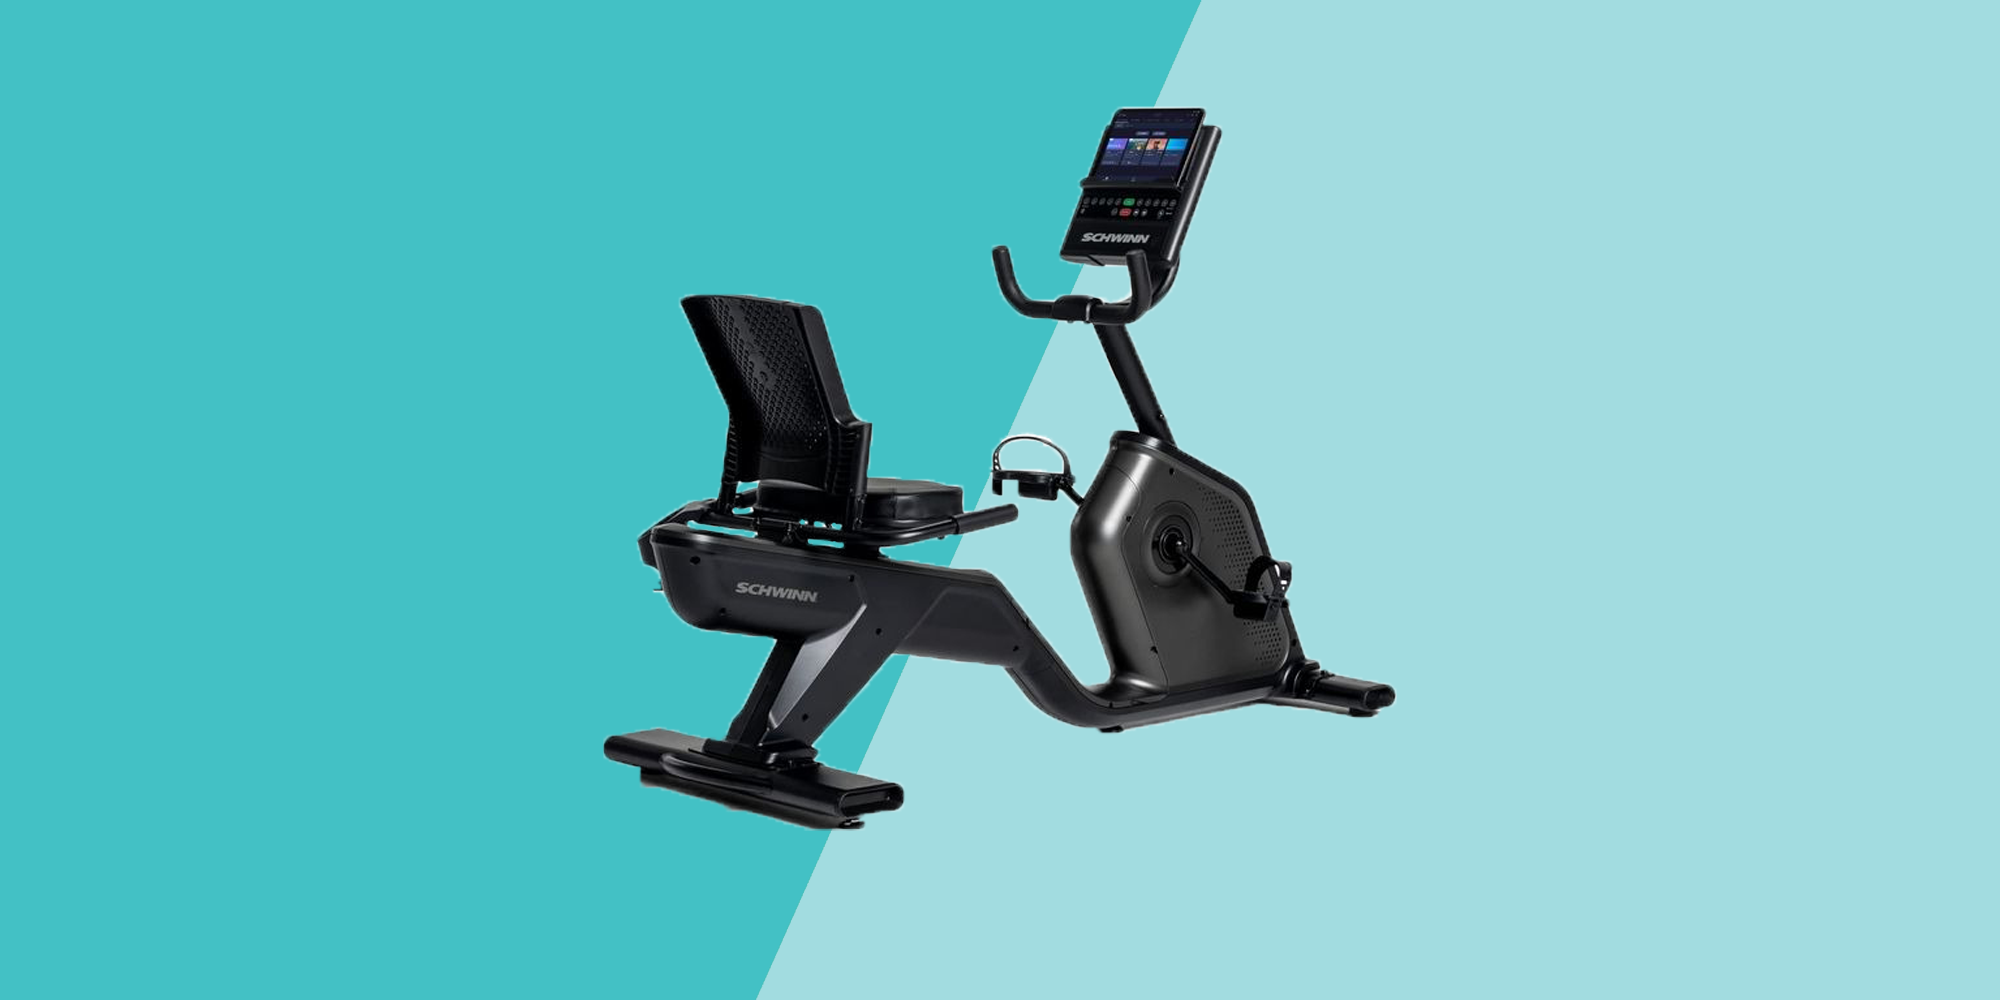 <p>Whether you’re recovering from an injury or interesting in a cardio workout that won’t put added stress on your joints, you might be interested in the best recumbent <a href="https://www.prevention.com/fitness/workout-clothes-gear/a46585503/schwinn-ic4-indoor-exercise-bike-review/">exercise bike</a>. Unlike <a href="https://www.prevention.com/fitness/workout-clothes-gear/g27558787/best-exercise-bikes/">traditional stationary bikes</a>, these feature a reclined seat with a backrest for support. They work muscles in the lower body, offering a comfortable, safe way for many to get their heart pumping and legs moving.</p><p>Recumbent bikes are great for seniors, people with joint pain, and those with low mobility and stiffness, Jim White, R.D.N., a certified personal trainer and owner of <a href="https://jimwhitefit.com/">Jim White Fitness and Nutrition Studios</a>, tells <em>Prevention</em>. “The benefits of using a recumbent exercise bike are reduced strain on a user’s back, hips, and knees due to the seating position,” explains Louis Ojeda, a personal trainer at <a href="https://fitloftmtc.com/">FITloft</a> in Montclair. They’re “user friendly for all fitness levels,” he adds.</p><p>However, if you’re looking for a full-body workout, you might need to add other elements, notes Ryan Kennedy, a NASM-certified trainer and fitness director at <a href="https://theparkatnj.com/">The Park</a>. “To build a more well-rounded cardio program, I would strongly recommend incorporating other means of exercise,” he says. “To ensure you are developing your core musculature properly, individuals will also want to mix-in some inclined walking,” suggests Kennedy.</p><p class="body-tip">Jim White, R.D.N., a certified personal trainer and owner of <a href="https://jimwhitefit.com/">Jim White Fitness and Nutrition Studios</a>; Louis Ojeda, a personal trainer at <a href="https://fitloftmtc.com/">FITloft</a> in Montclair, NJ; and Ryan Kennedy, a NASM-certified trainer and fitness director at <a href="https://theparkatnj.com/">The Park</a>.</p><p>Although it’s difficult to shop for the best recumbent exercise bike without testing one out for yourself, there are key factors to keep in mind. Consider the size of your space, how much guidance you’ll need in terms of workouts, the comfort of the seat type, and how high-tech you expect your equipment to be. Of course, your budget is also important to keep in mind. Some commercial bikes cost thousands, while some more basic options are <a href="https://www.prevention.com/fitness/workout-clothes-gear/a46804414/yosuda-indoor-cycling-bike-amazon-sale/">available on Amazon</a> for just a few hundred dollars.</p><h2 class="body-h2">Our top picks</h2><p>Ahead, shop the best recumbent bikes for all fitness levels. Some are recommended by the experts we interviewed, while others are from trusted brands and have many positive reviews from people who’ve tried them. Based on our research, these are the best indoor exercise bikes to consider.</p>